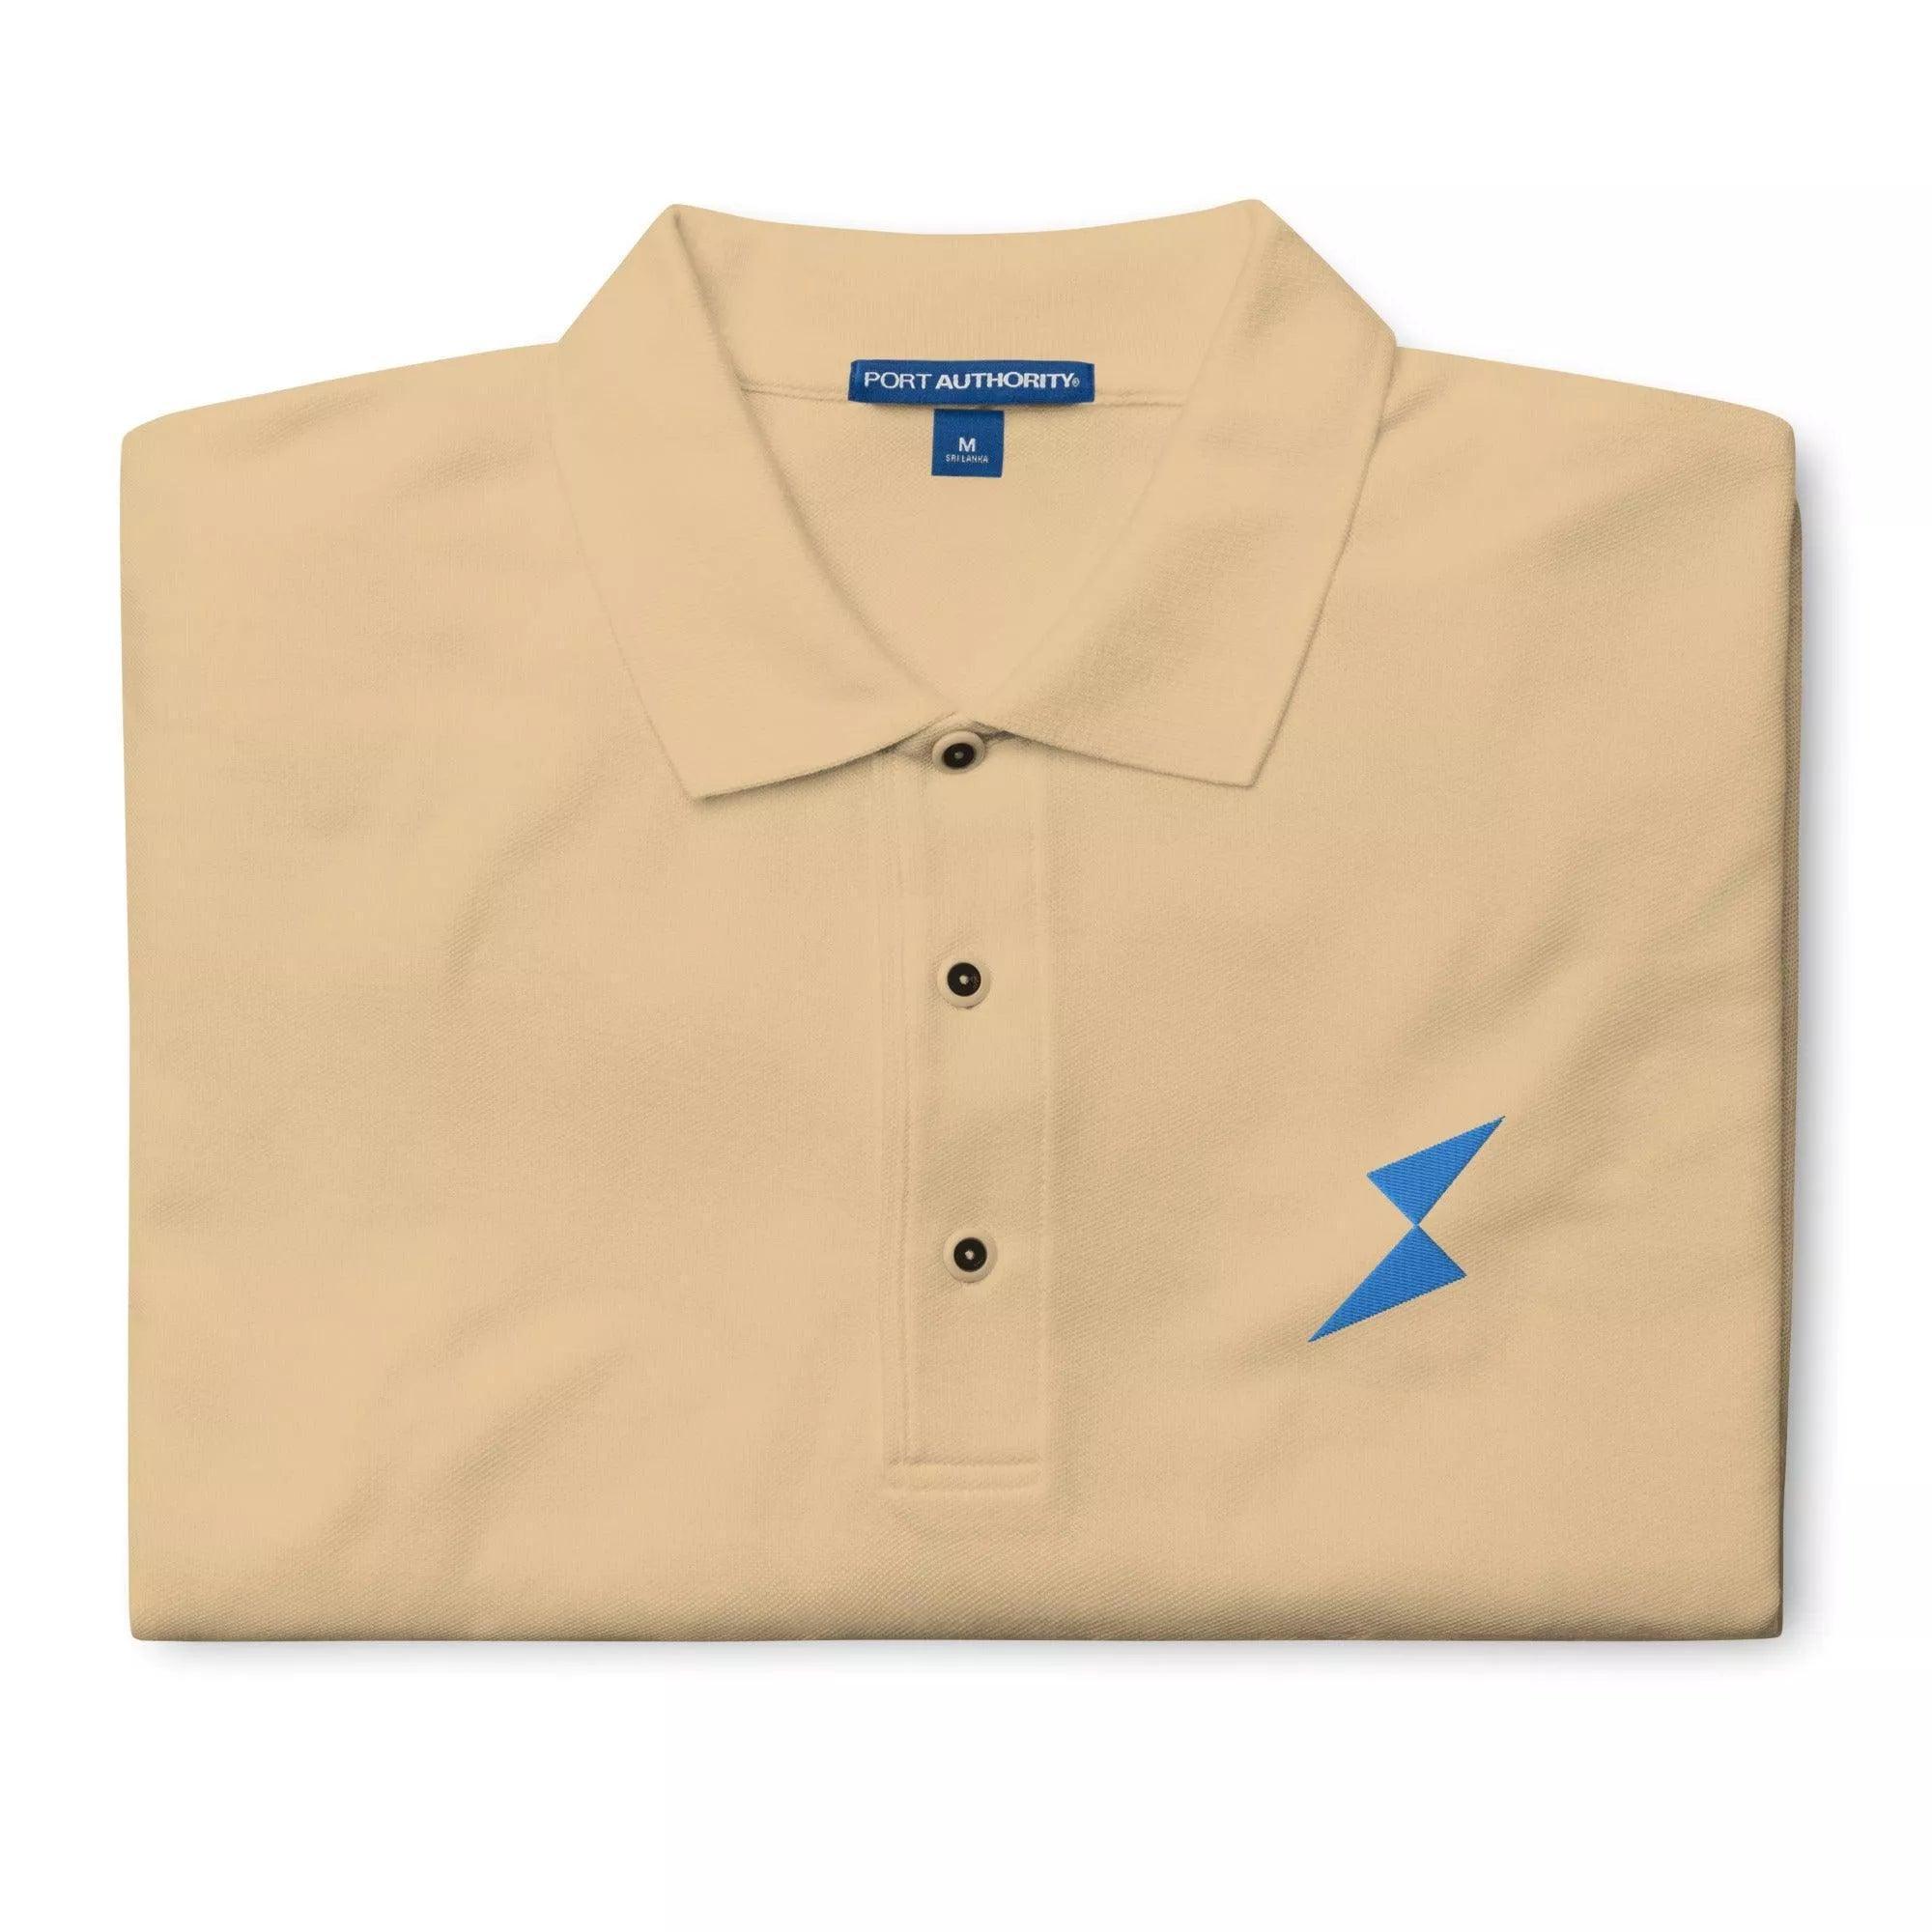 THORChain Polo Shirt - InvestmenTees